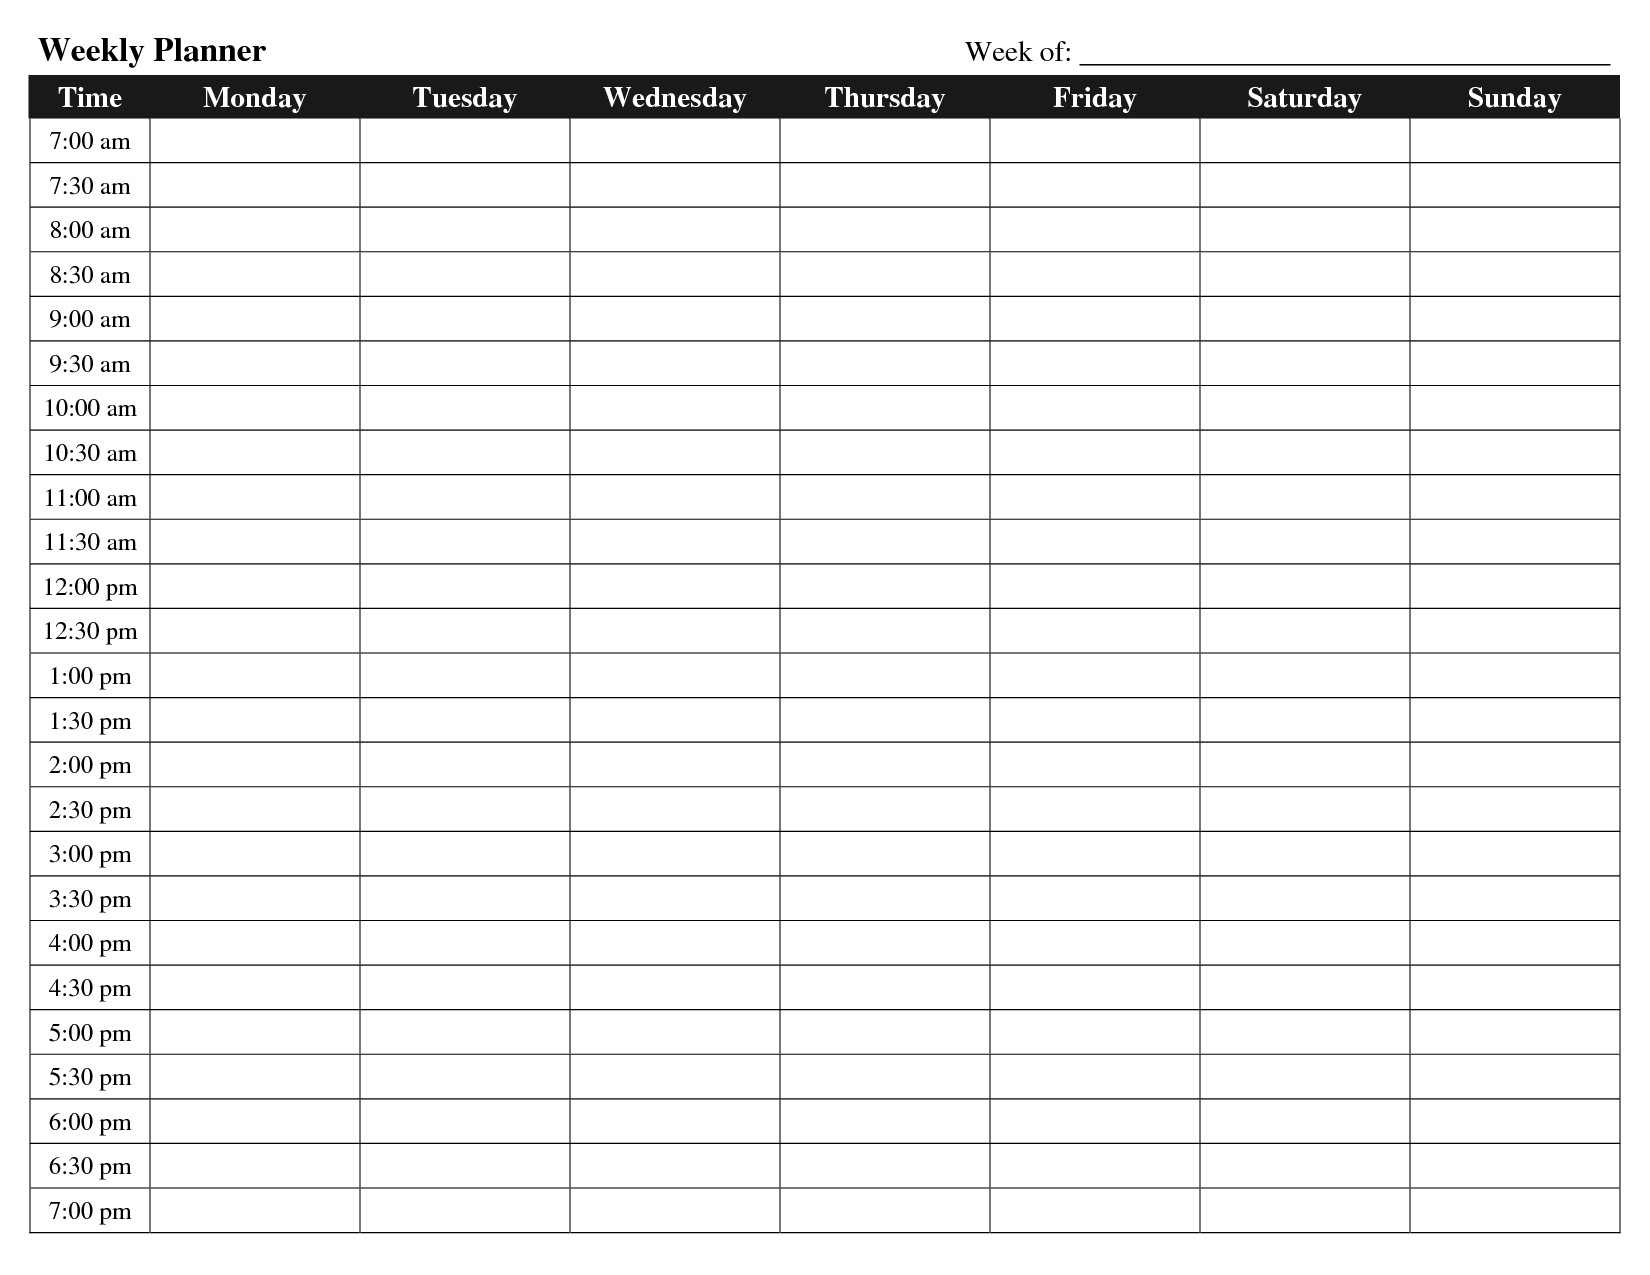 Weekly Planner Template With Times Printable Daily Templates Free with regard to Blank Daily Schedule With Time Slots